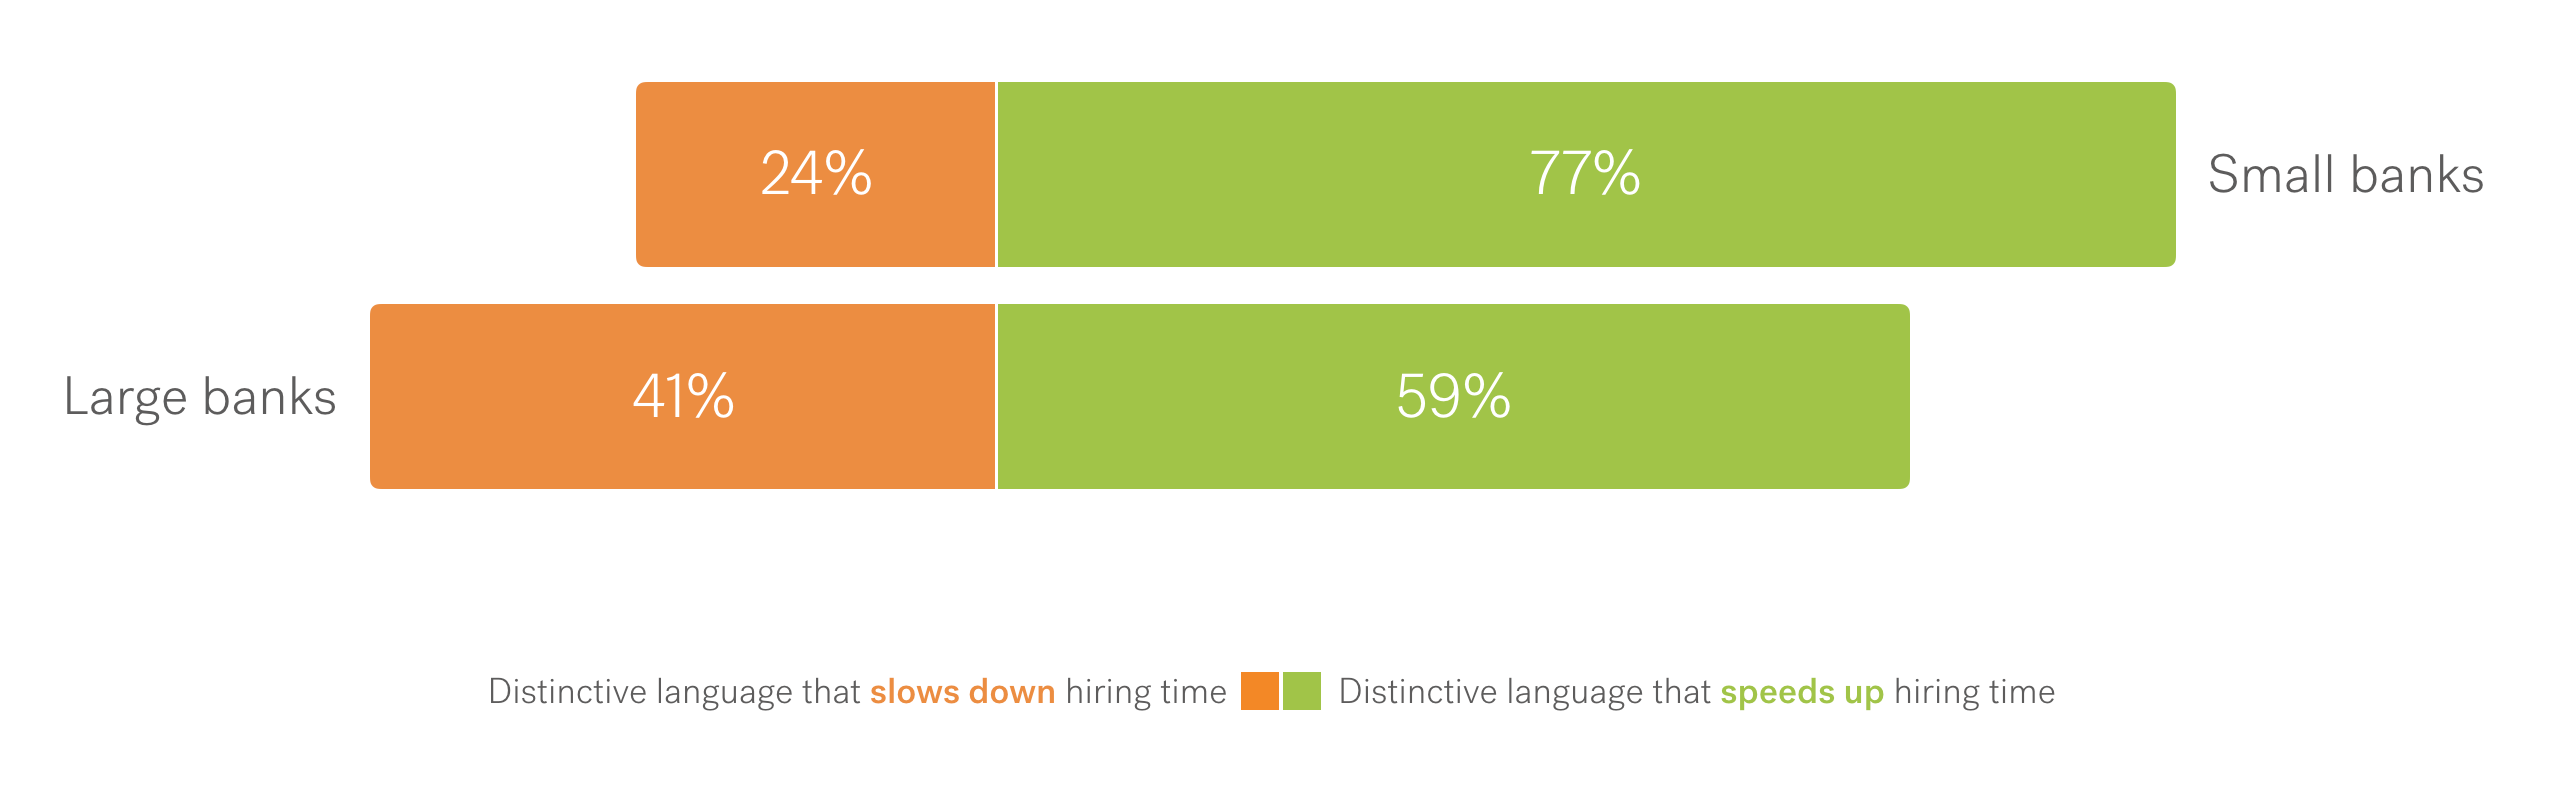 Chart showing % distribution of language that slows down vs speeds up hiring. Small banks have 24% that slows down and 77% that speeds up hiring. Large banks have 41% that slows down vs 59% that speeds up hiring.